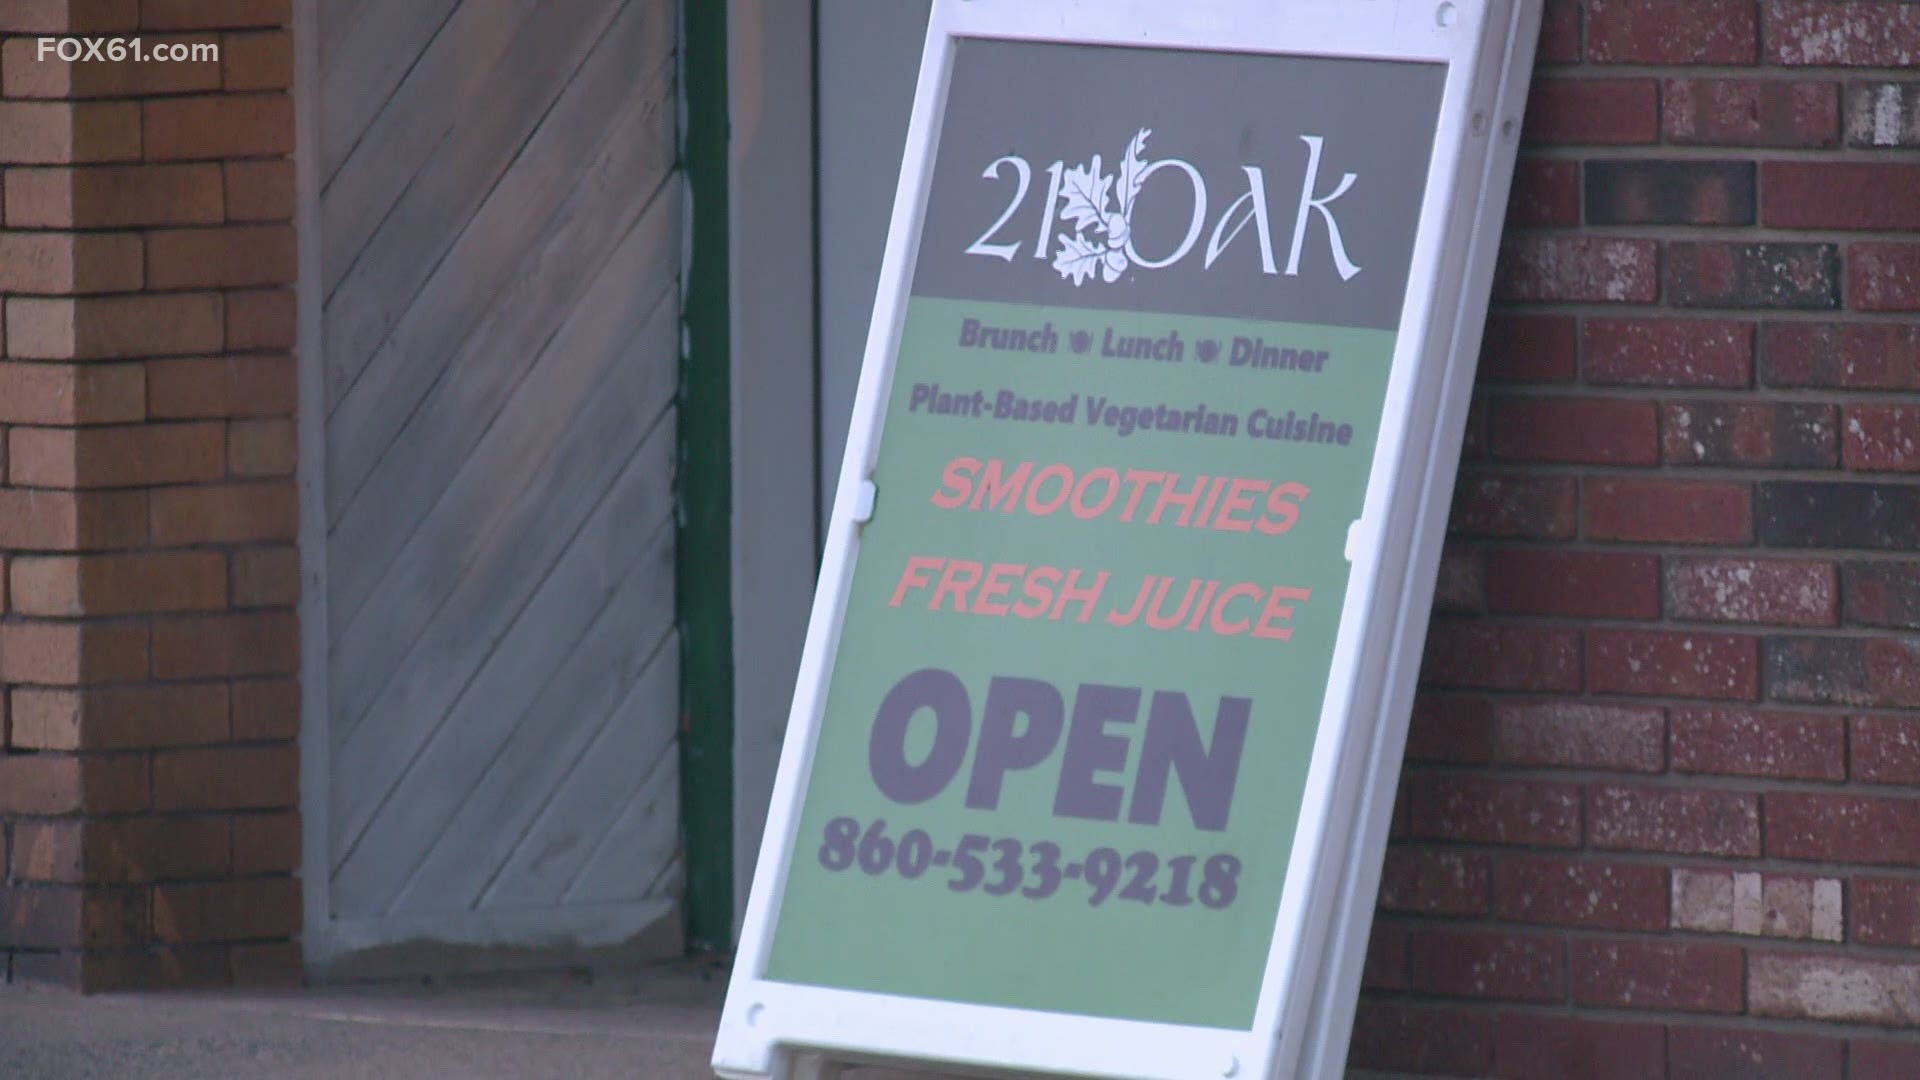 With the pandemic hitting the family-owned business hard the owner said they were considering closing the doors.